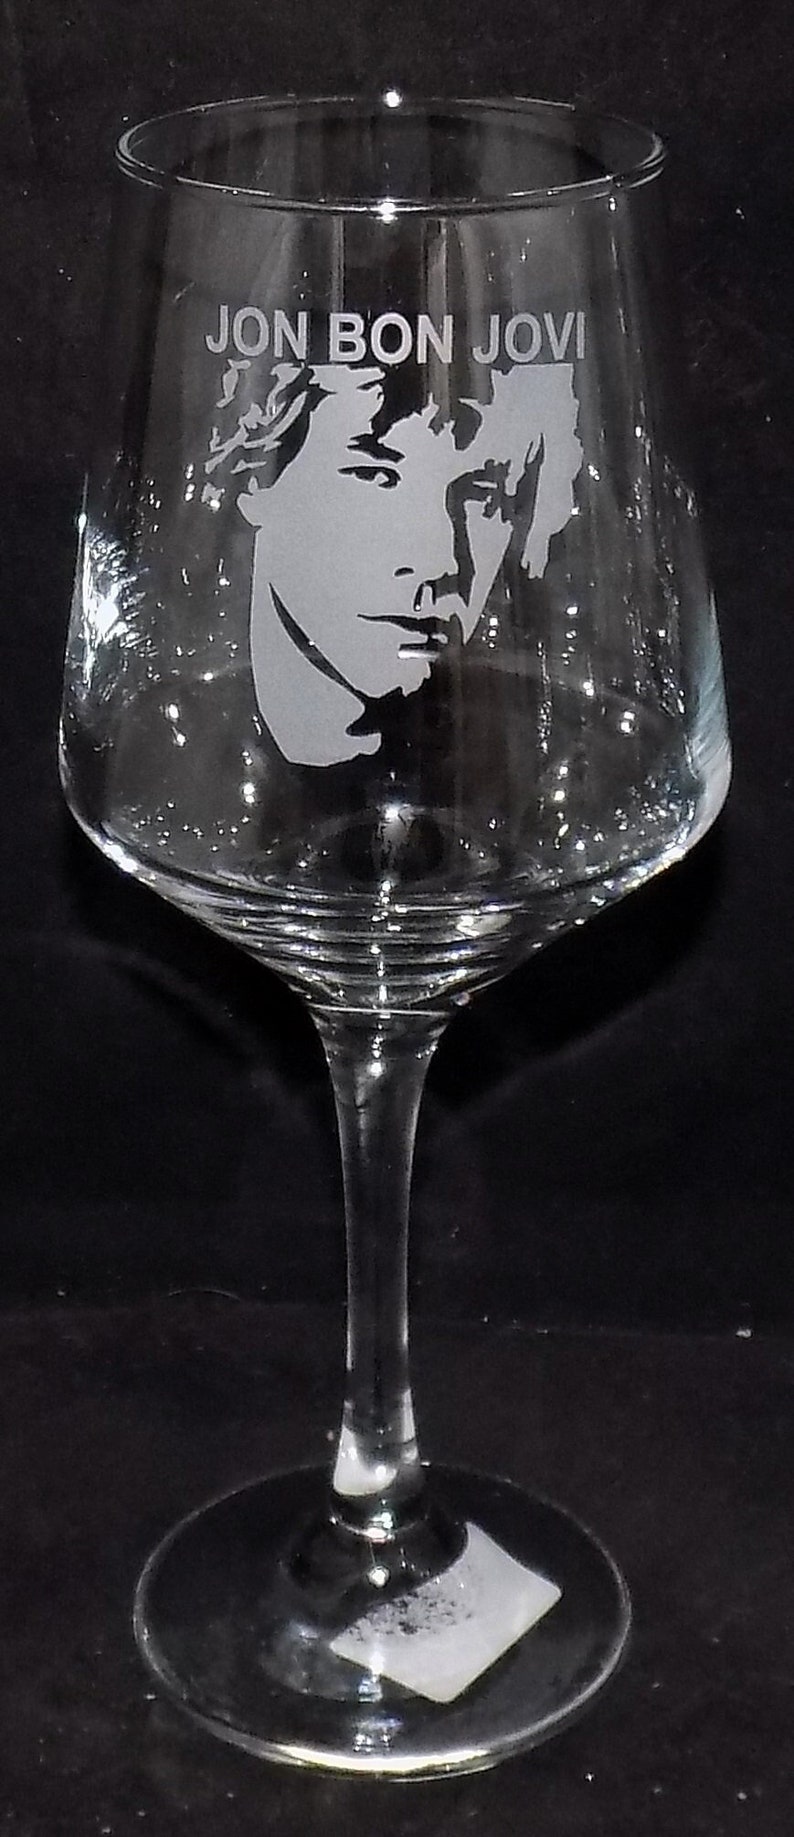 New Hand Etched 'JON BON JOVI' Wine Glass With Free Gift Box Beautiful Birthday, Christmas, Mothers Day or Fathers Day Gift Single Glass